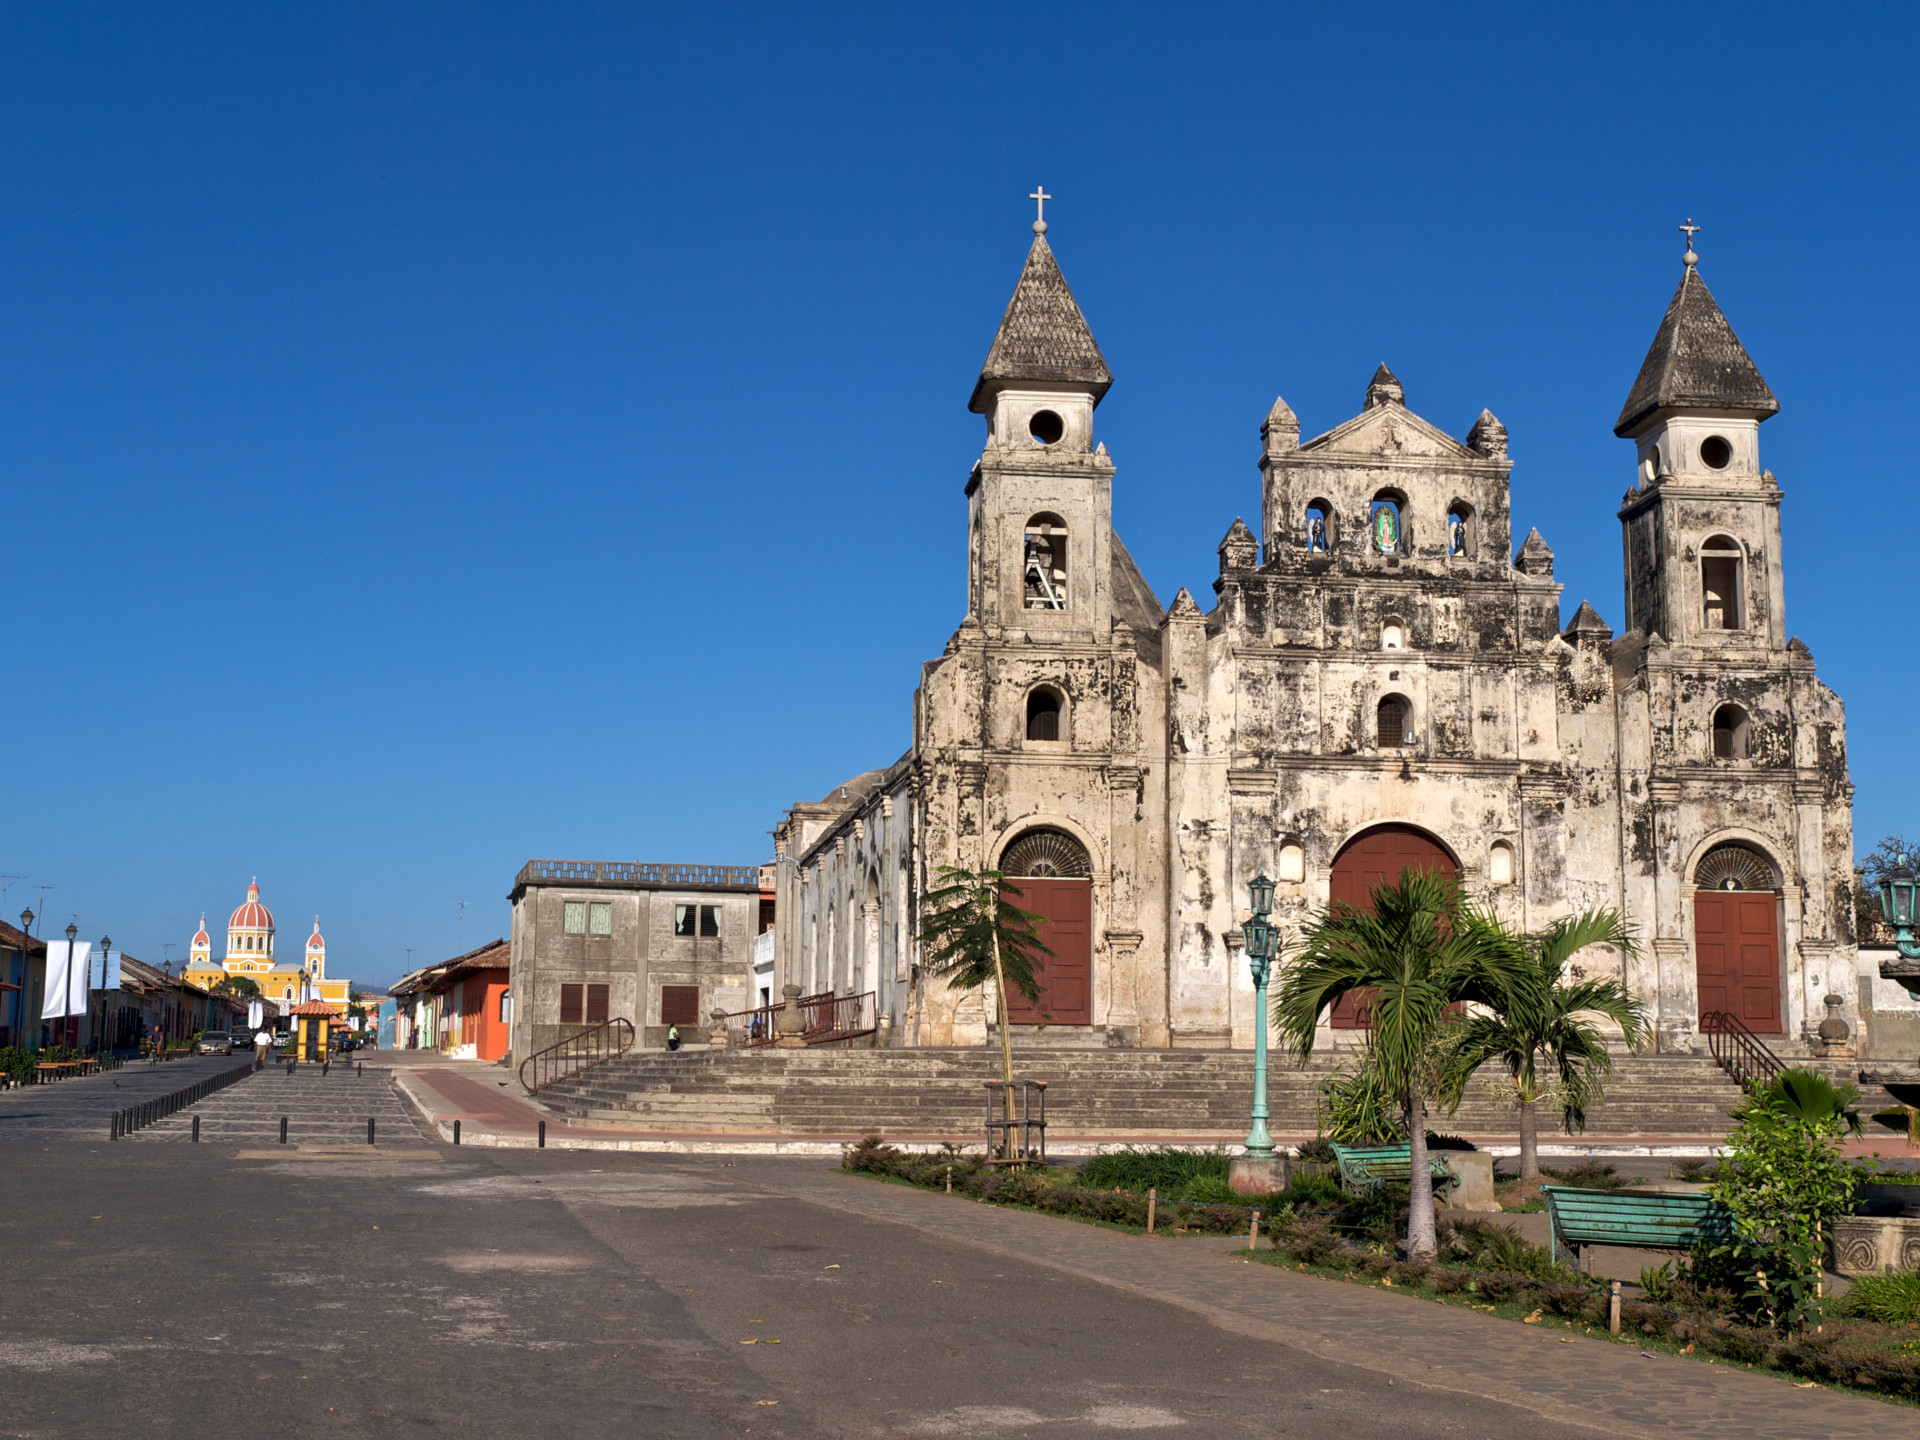 The Nicaraguan city is very popular with tourists traveling through Central America. The famous Church of Guadalupe is one of its main attractions.<p>You may also like:<a href="https://www.starsinsider.com/n/302589?utm_source=msn.com&utm_medium=display&utm_campaign=referral_description&utm_content=210974v3en-ae"> Remembering Christopher Plummer, Hollywood's distinguished gentleman</a></p>